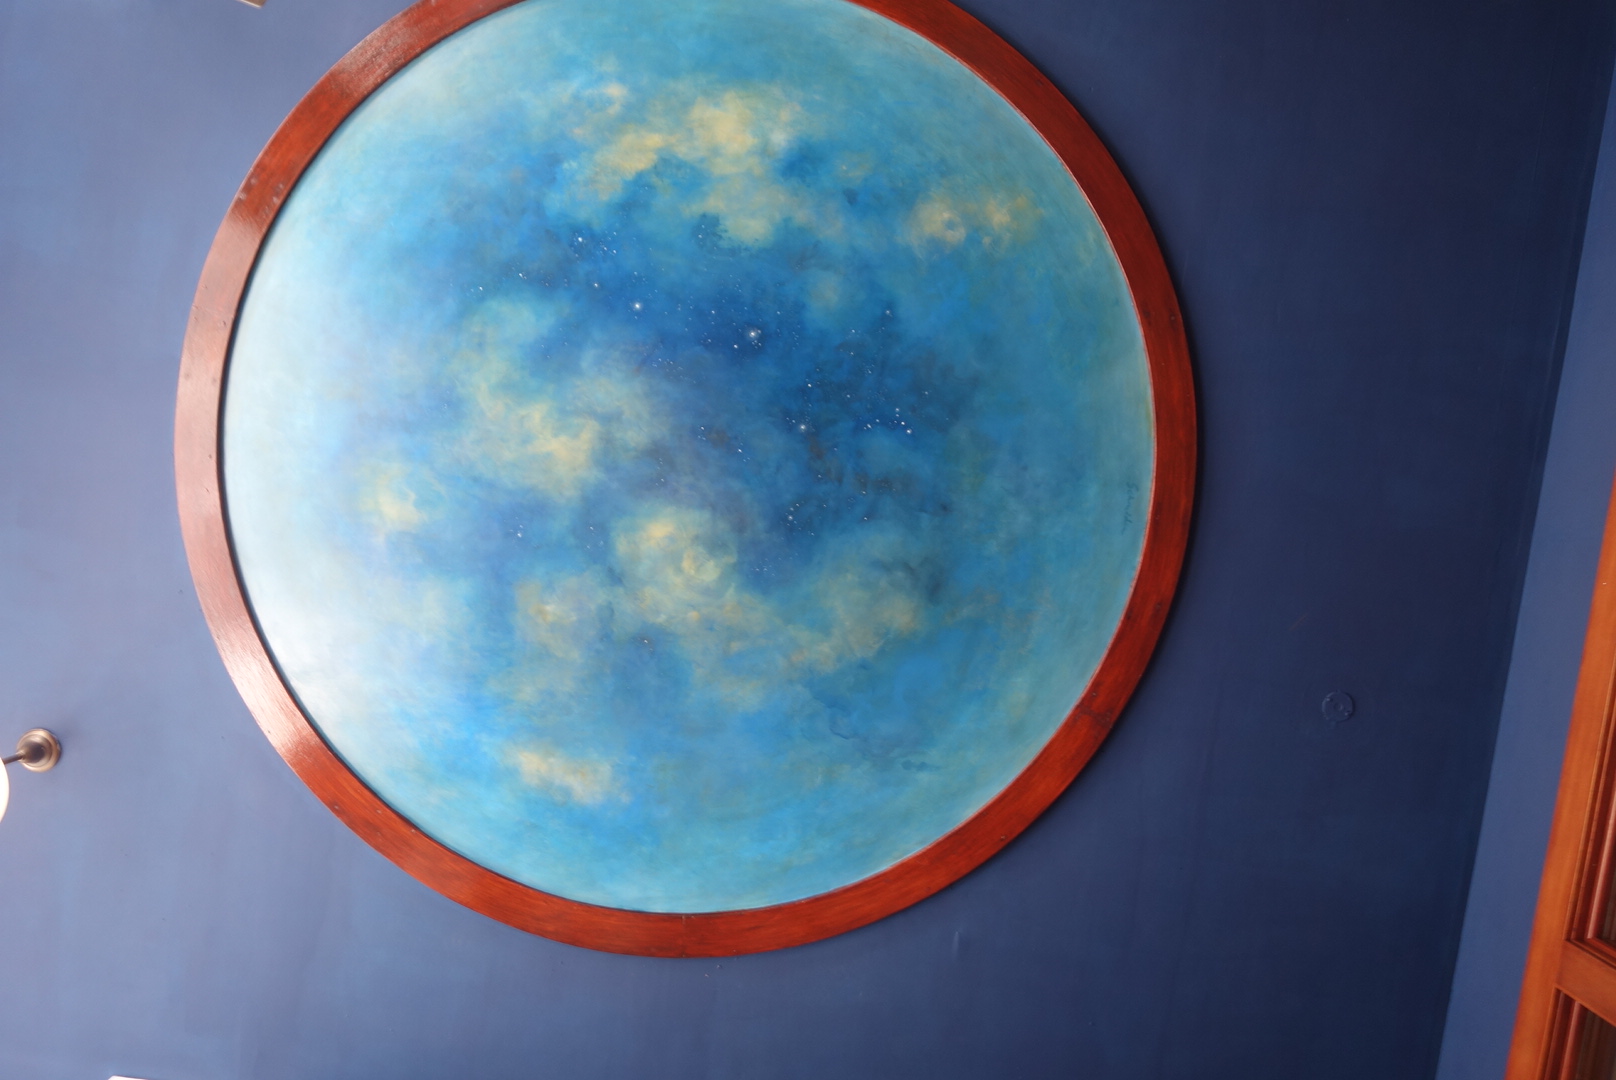 This painting decorating the entryway to the Throckmorton Theatre in Mill Valley, Calif., was painted by Robin Williams' widow Susan Schneider. Photograph taken Aug. 12, 2014. (Katy Steinmetz for TIME)